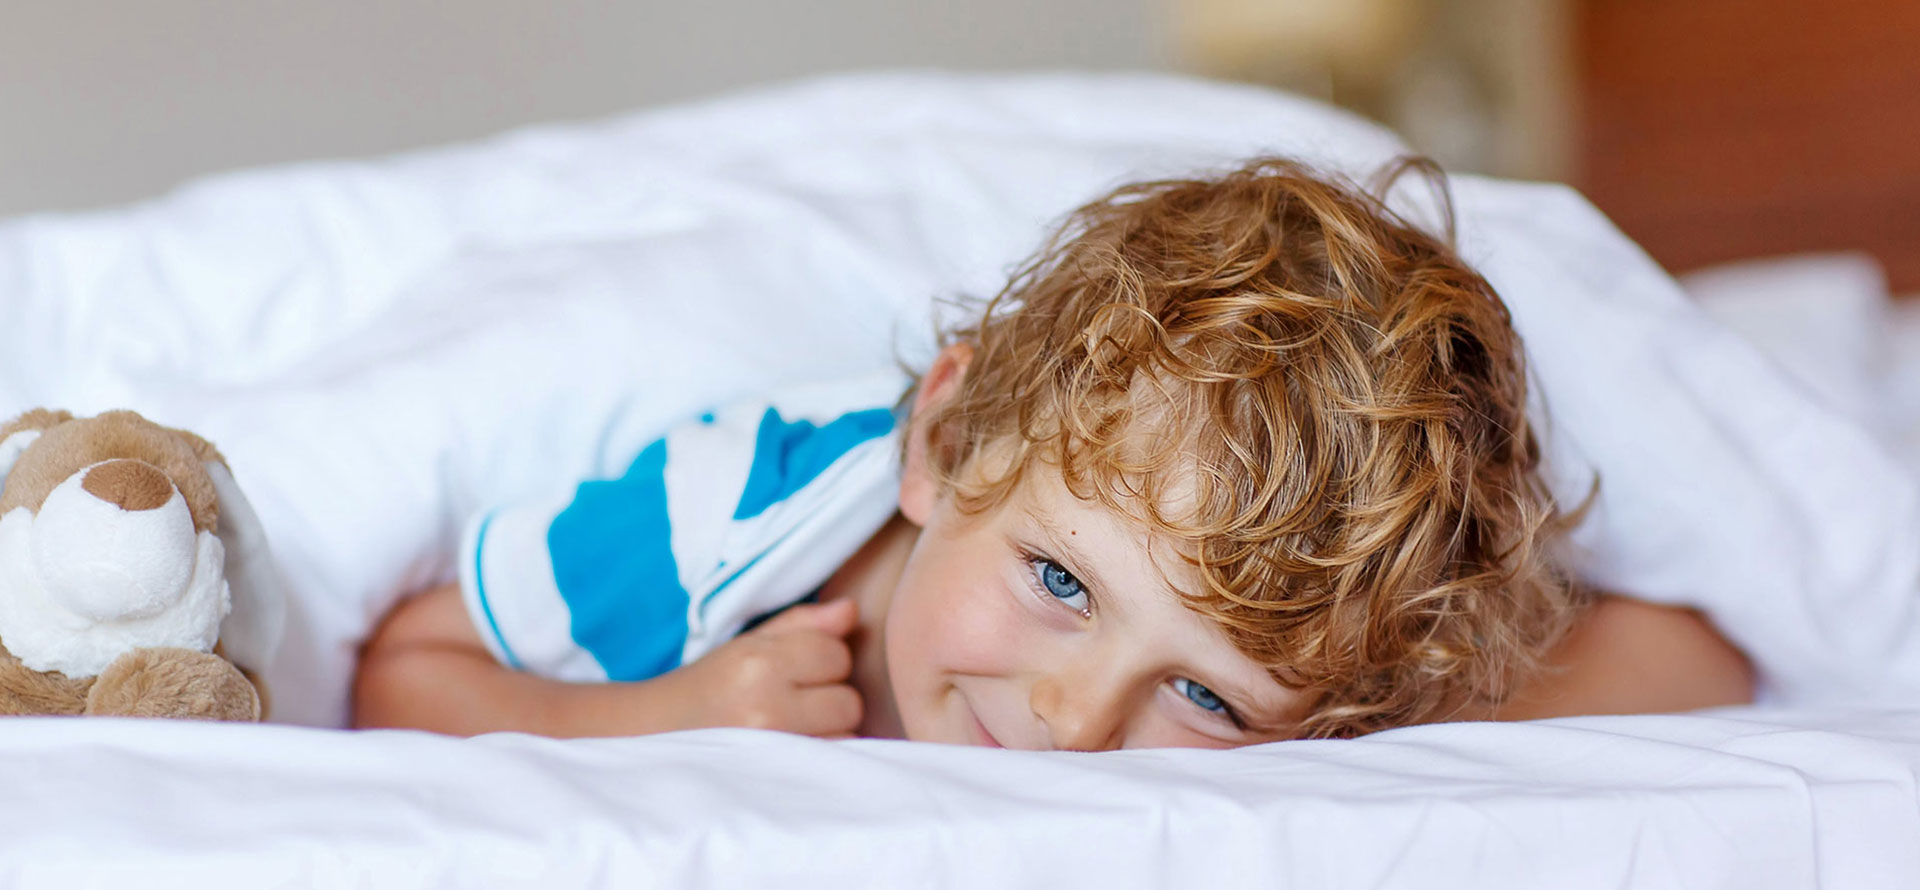 Large photo of a smiling blonde boy with bright blue eyes lying under white covers with a plush toy dog.